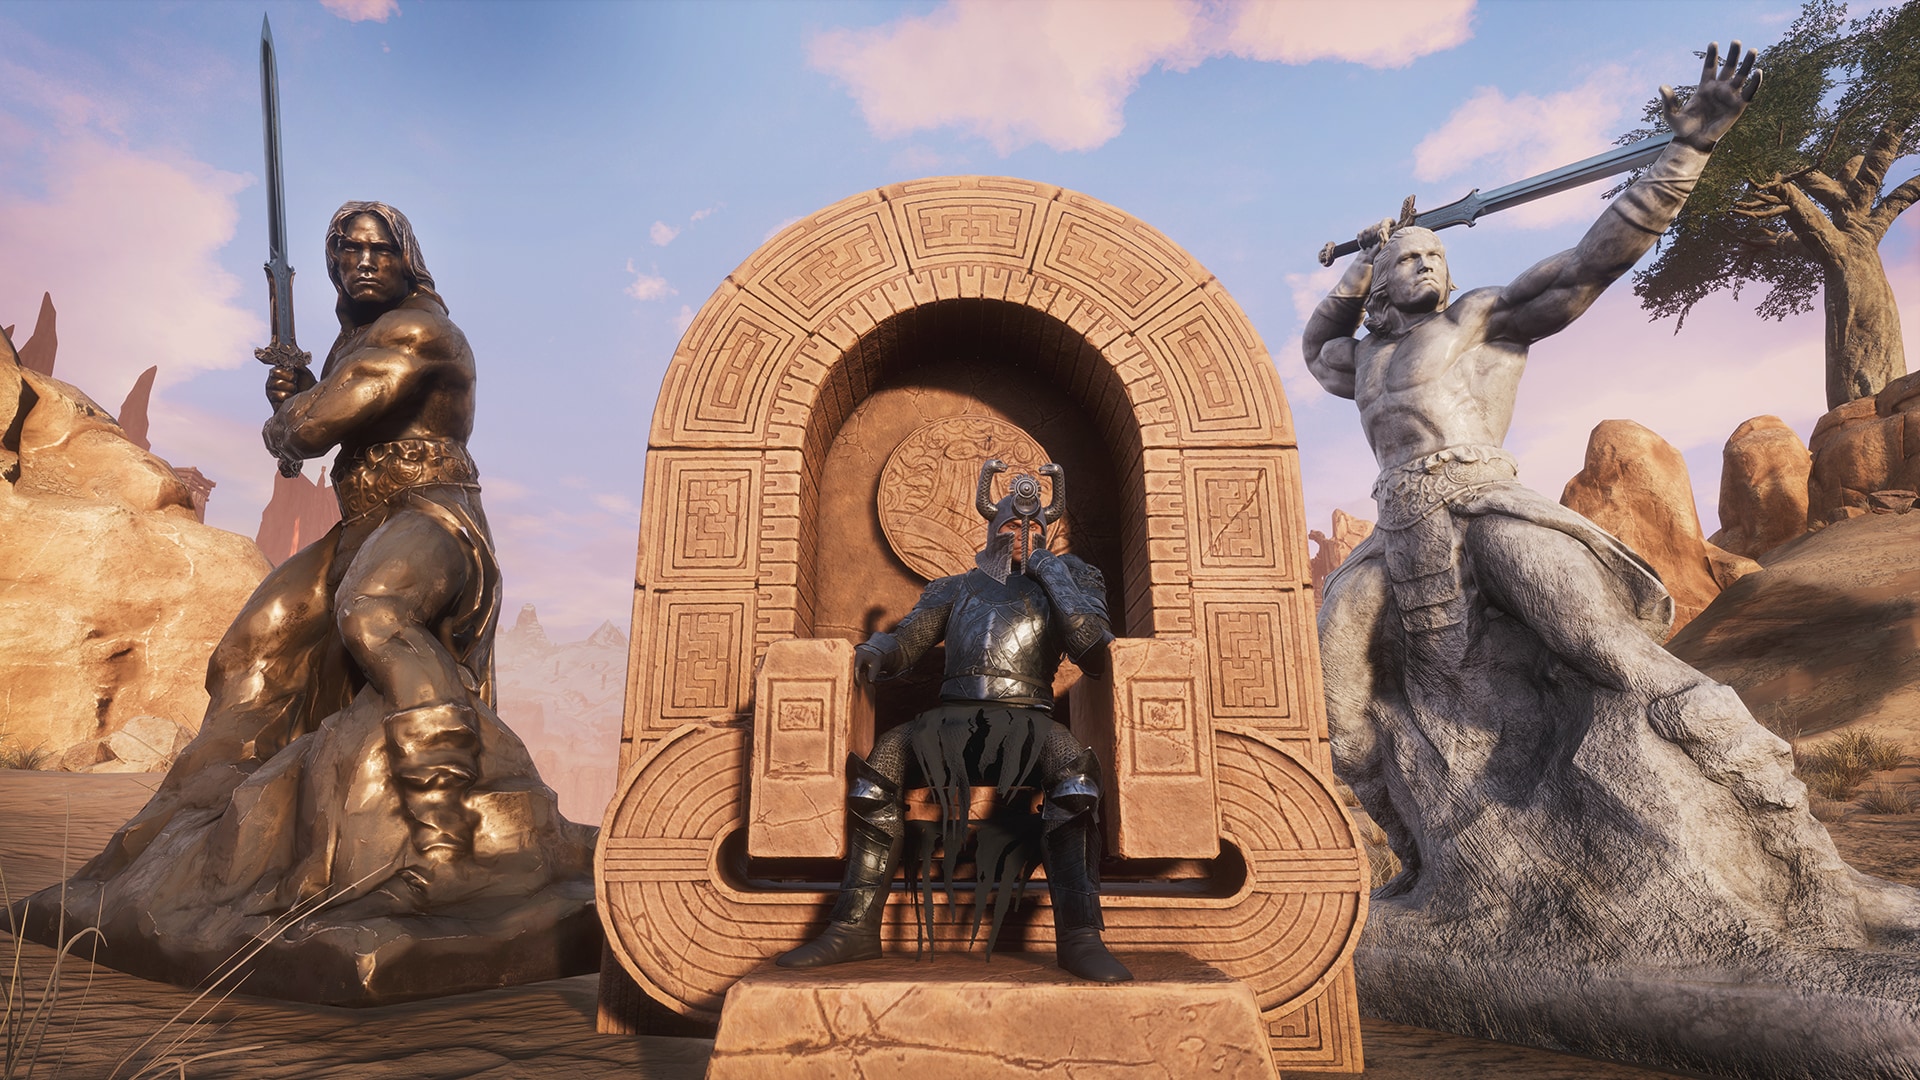 Conan Exiles - The Riddle of Steel Steam Key GLOBAL - 4